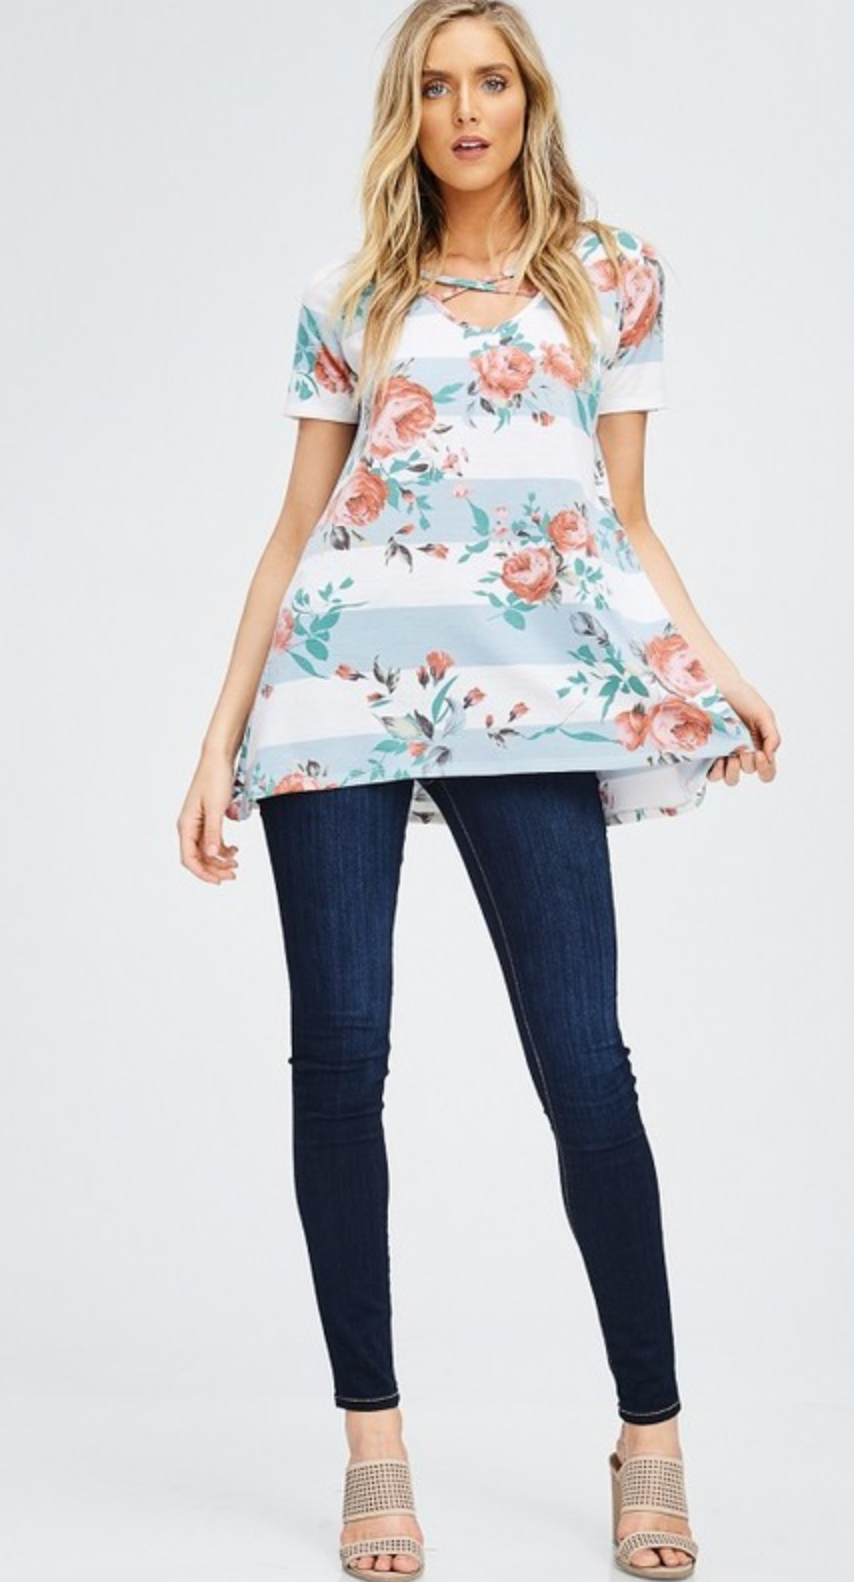 Criss Cross Neck Floral Striped Top - Blue/White